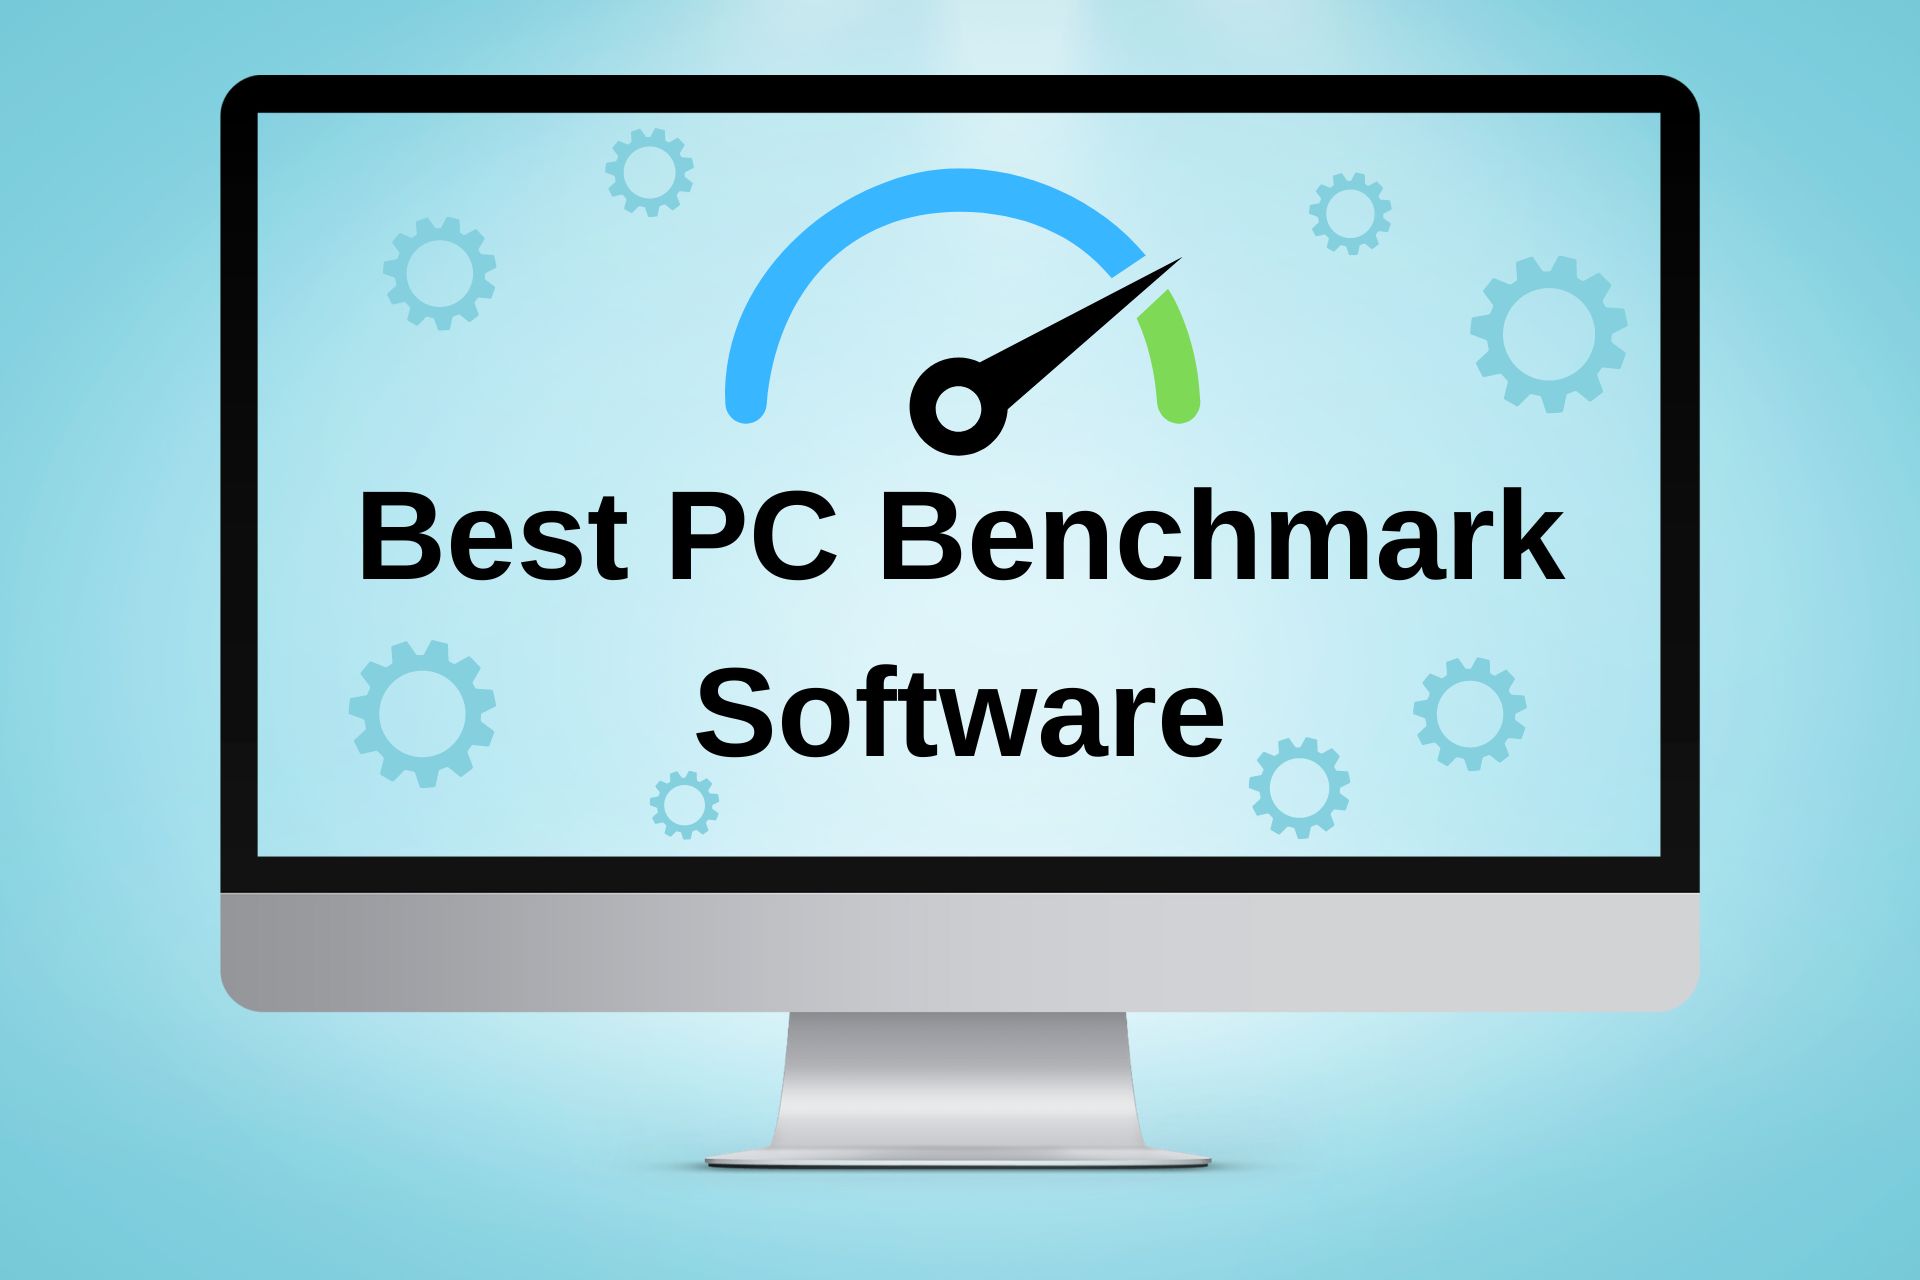 Best PC Benchmark Software